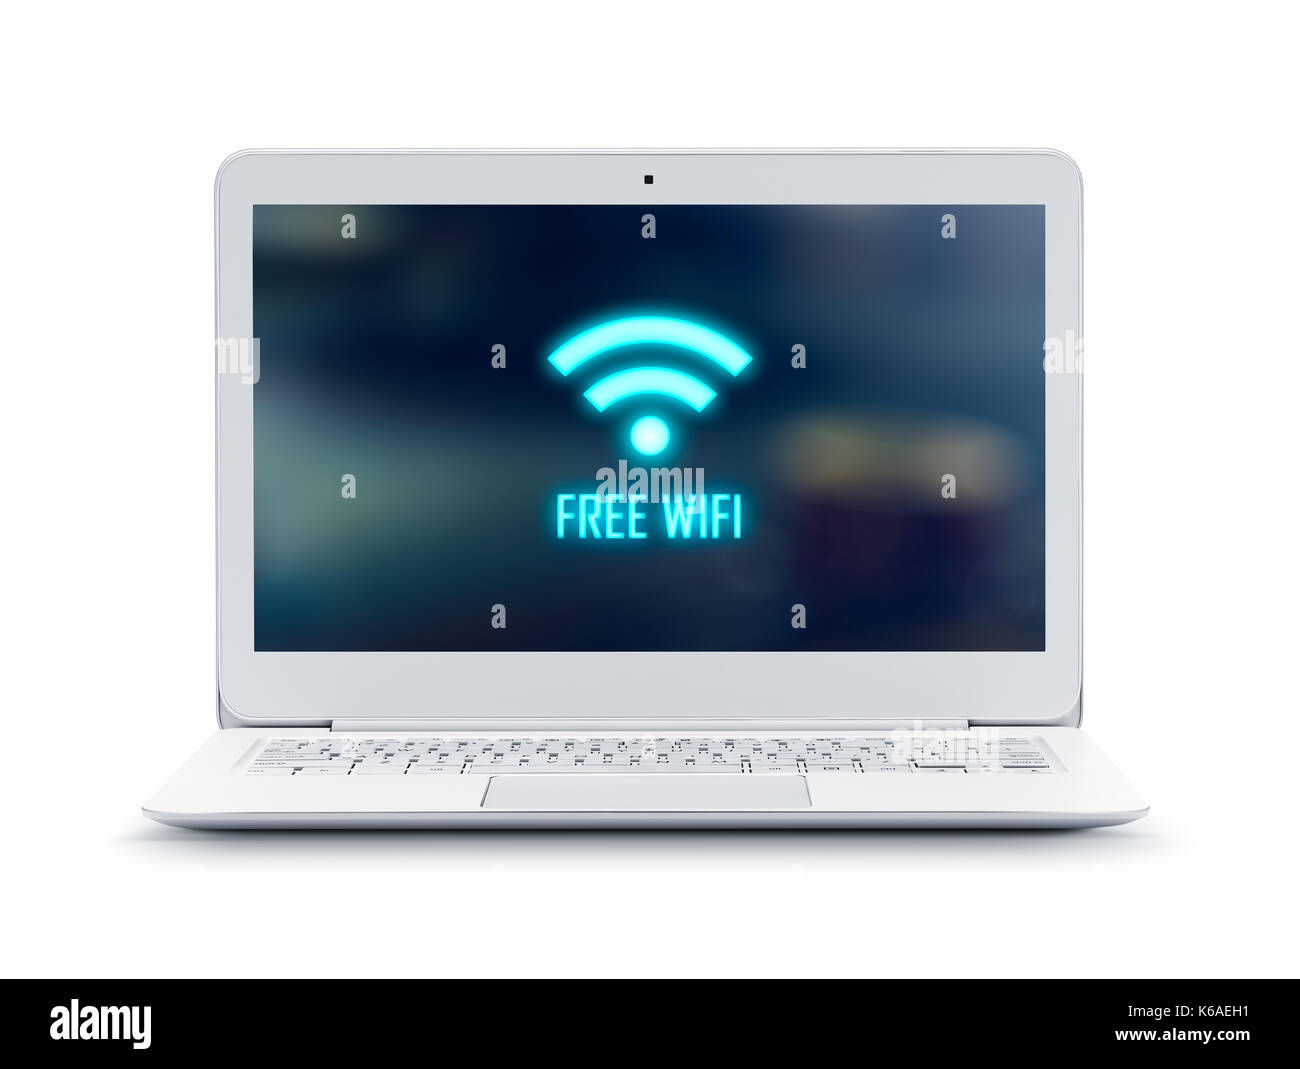 Laptop with Free Wifi logo isolated on white background - Clipping path included Stock Photo